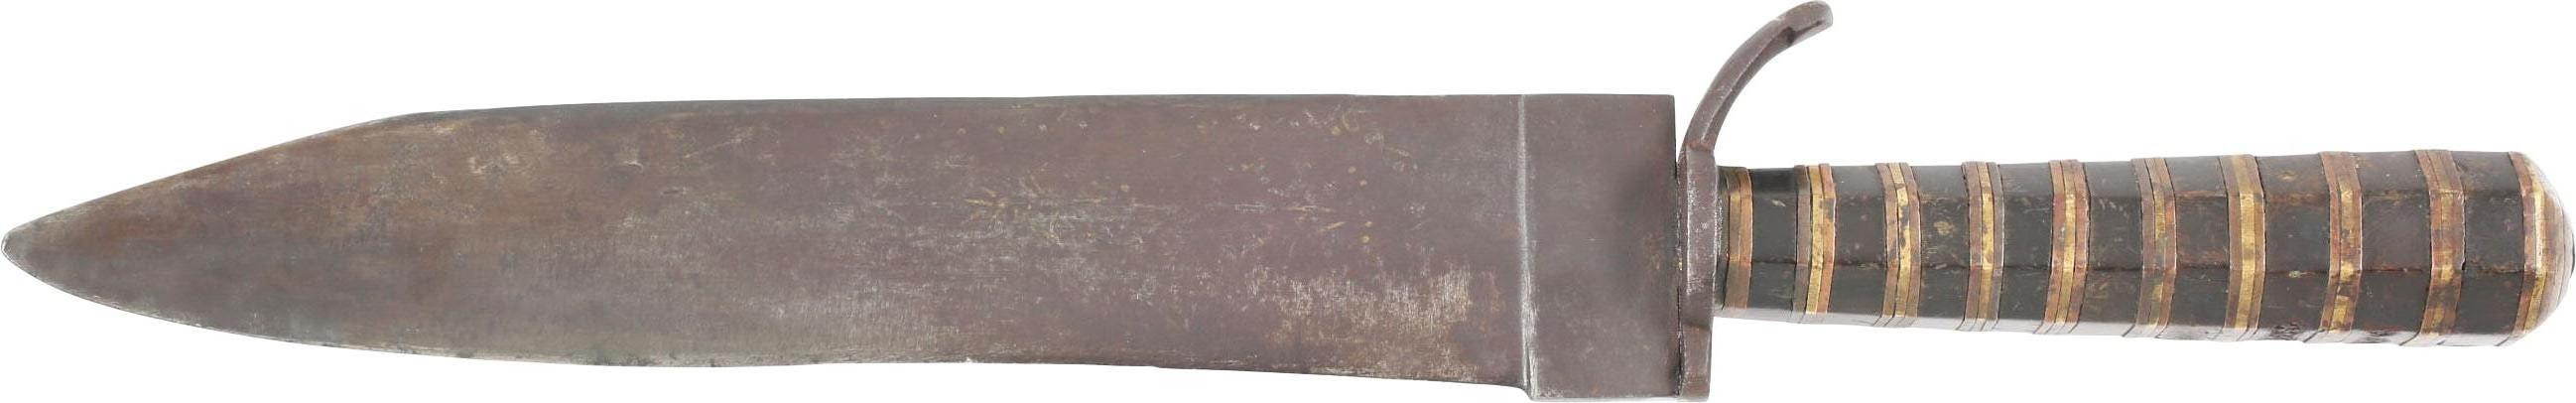 A SPANISH SOUTHWEST FIGHTING KNIFE C.1800. - Fagan Arms